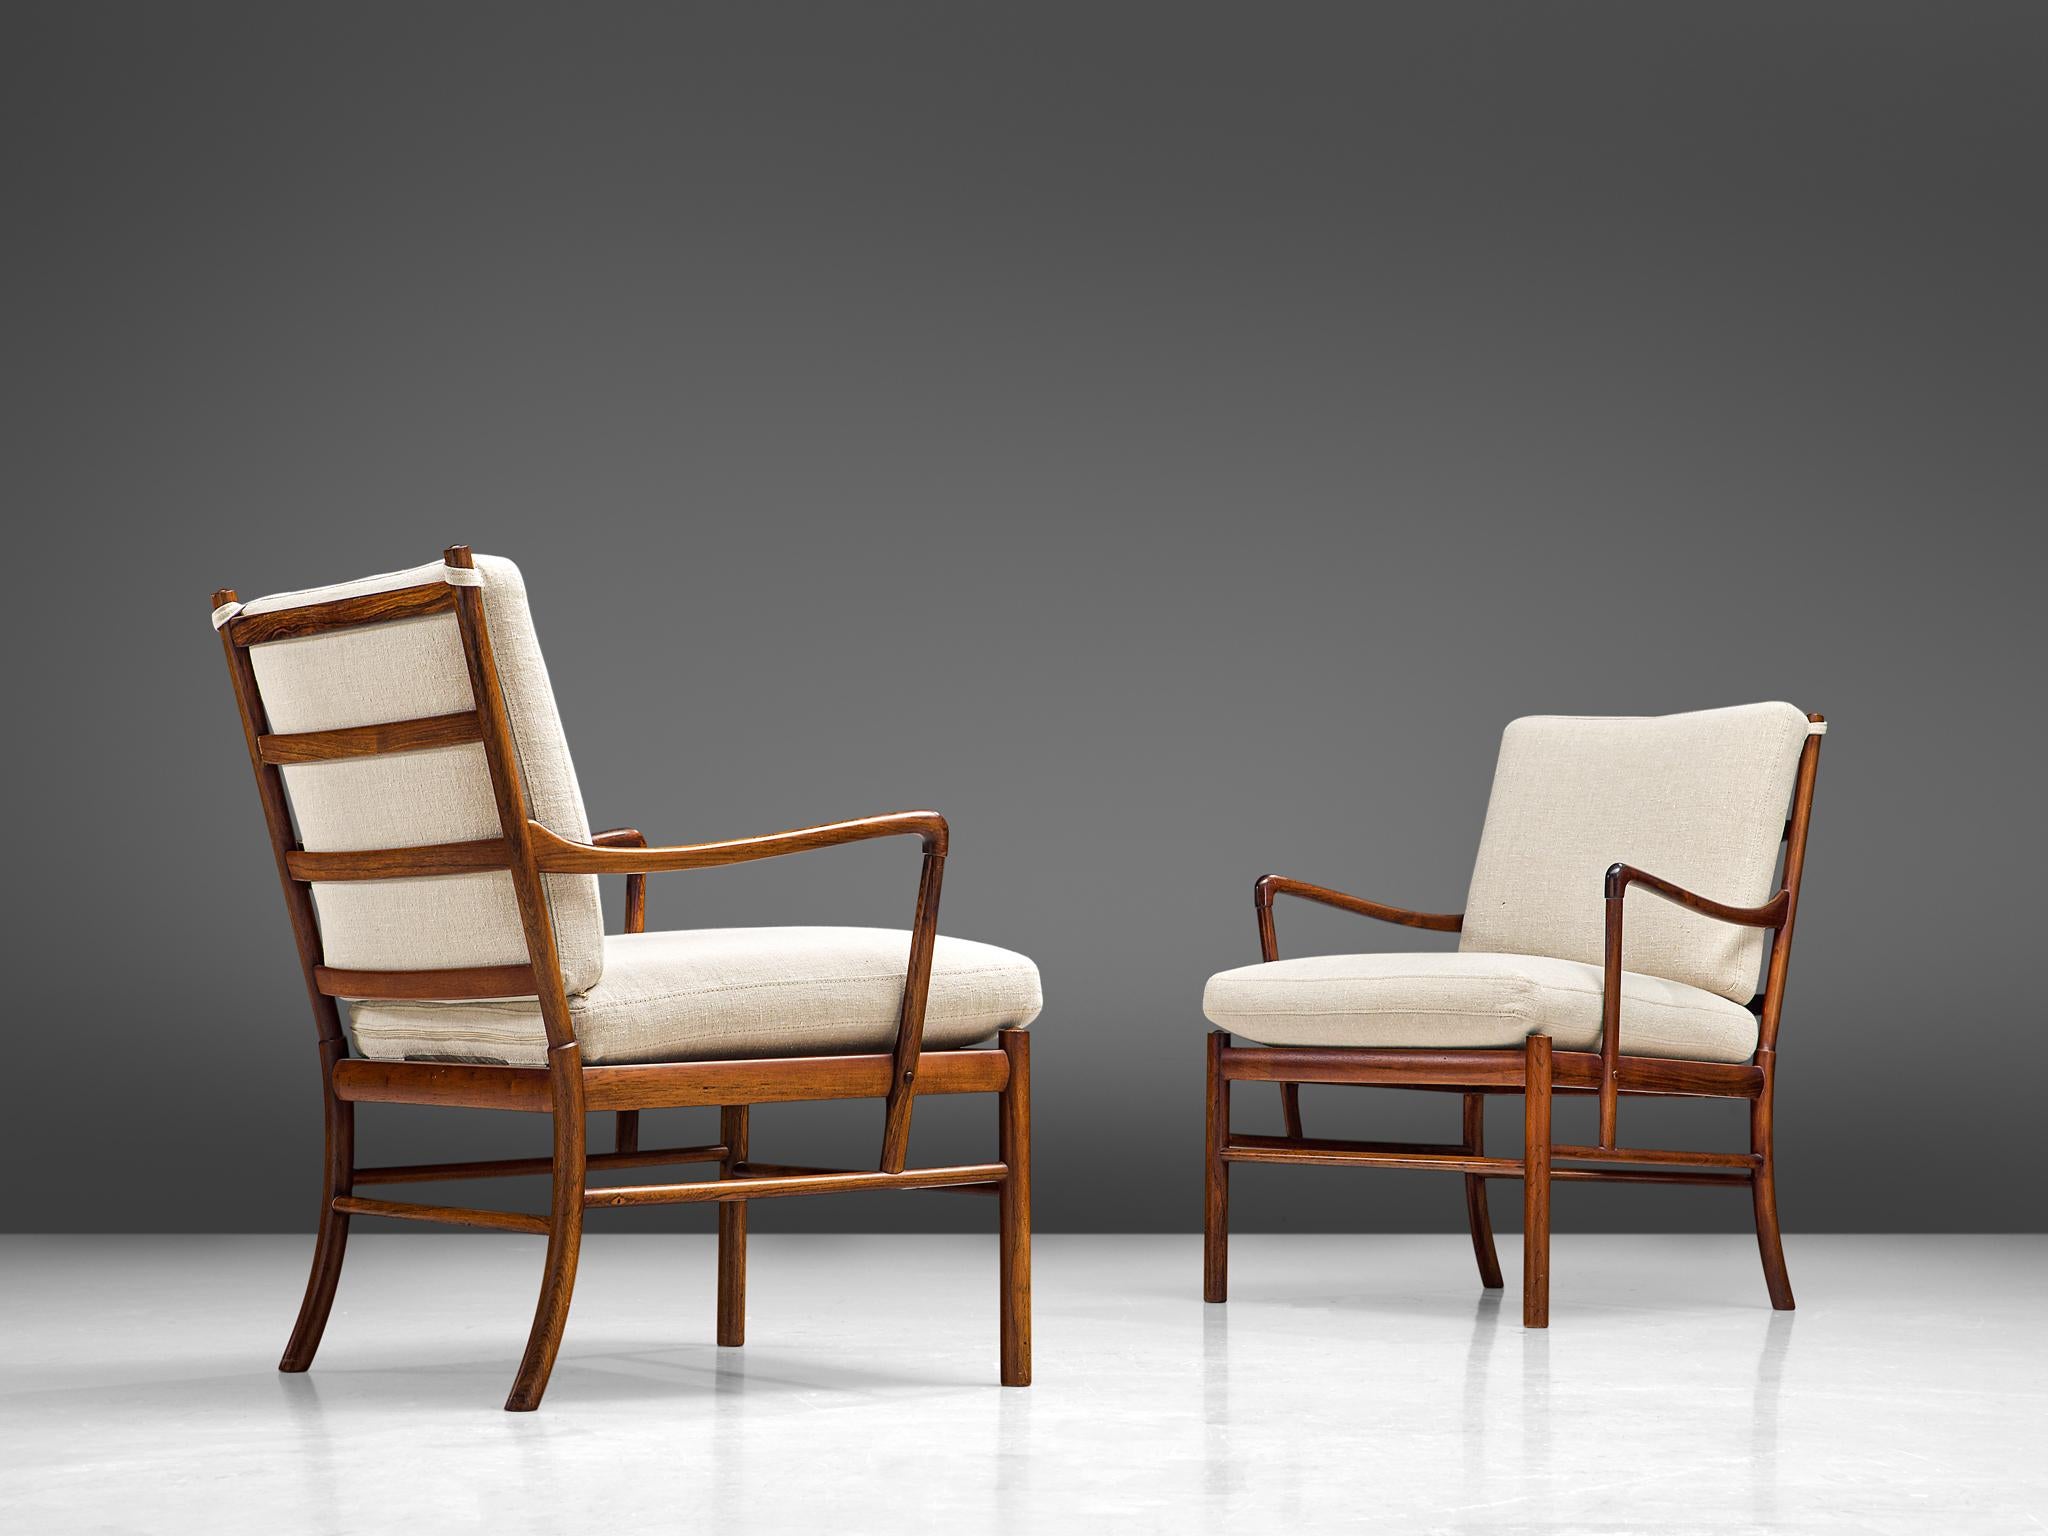 Ole Wanscher for Poul Jeppesen, pair of 'Colonial' armchairs, rosewood, cane and fabric, Denmark, 1949

Elegant pair easy chairs with a slim, rosewood frame by the Danish designer Ole Wanscher. These chairs show the great craftsmanship and attention